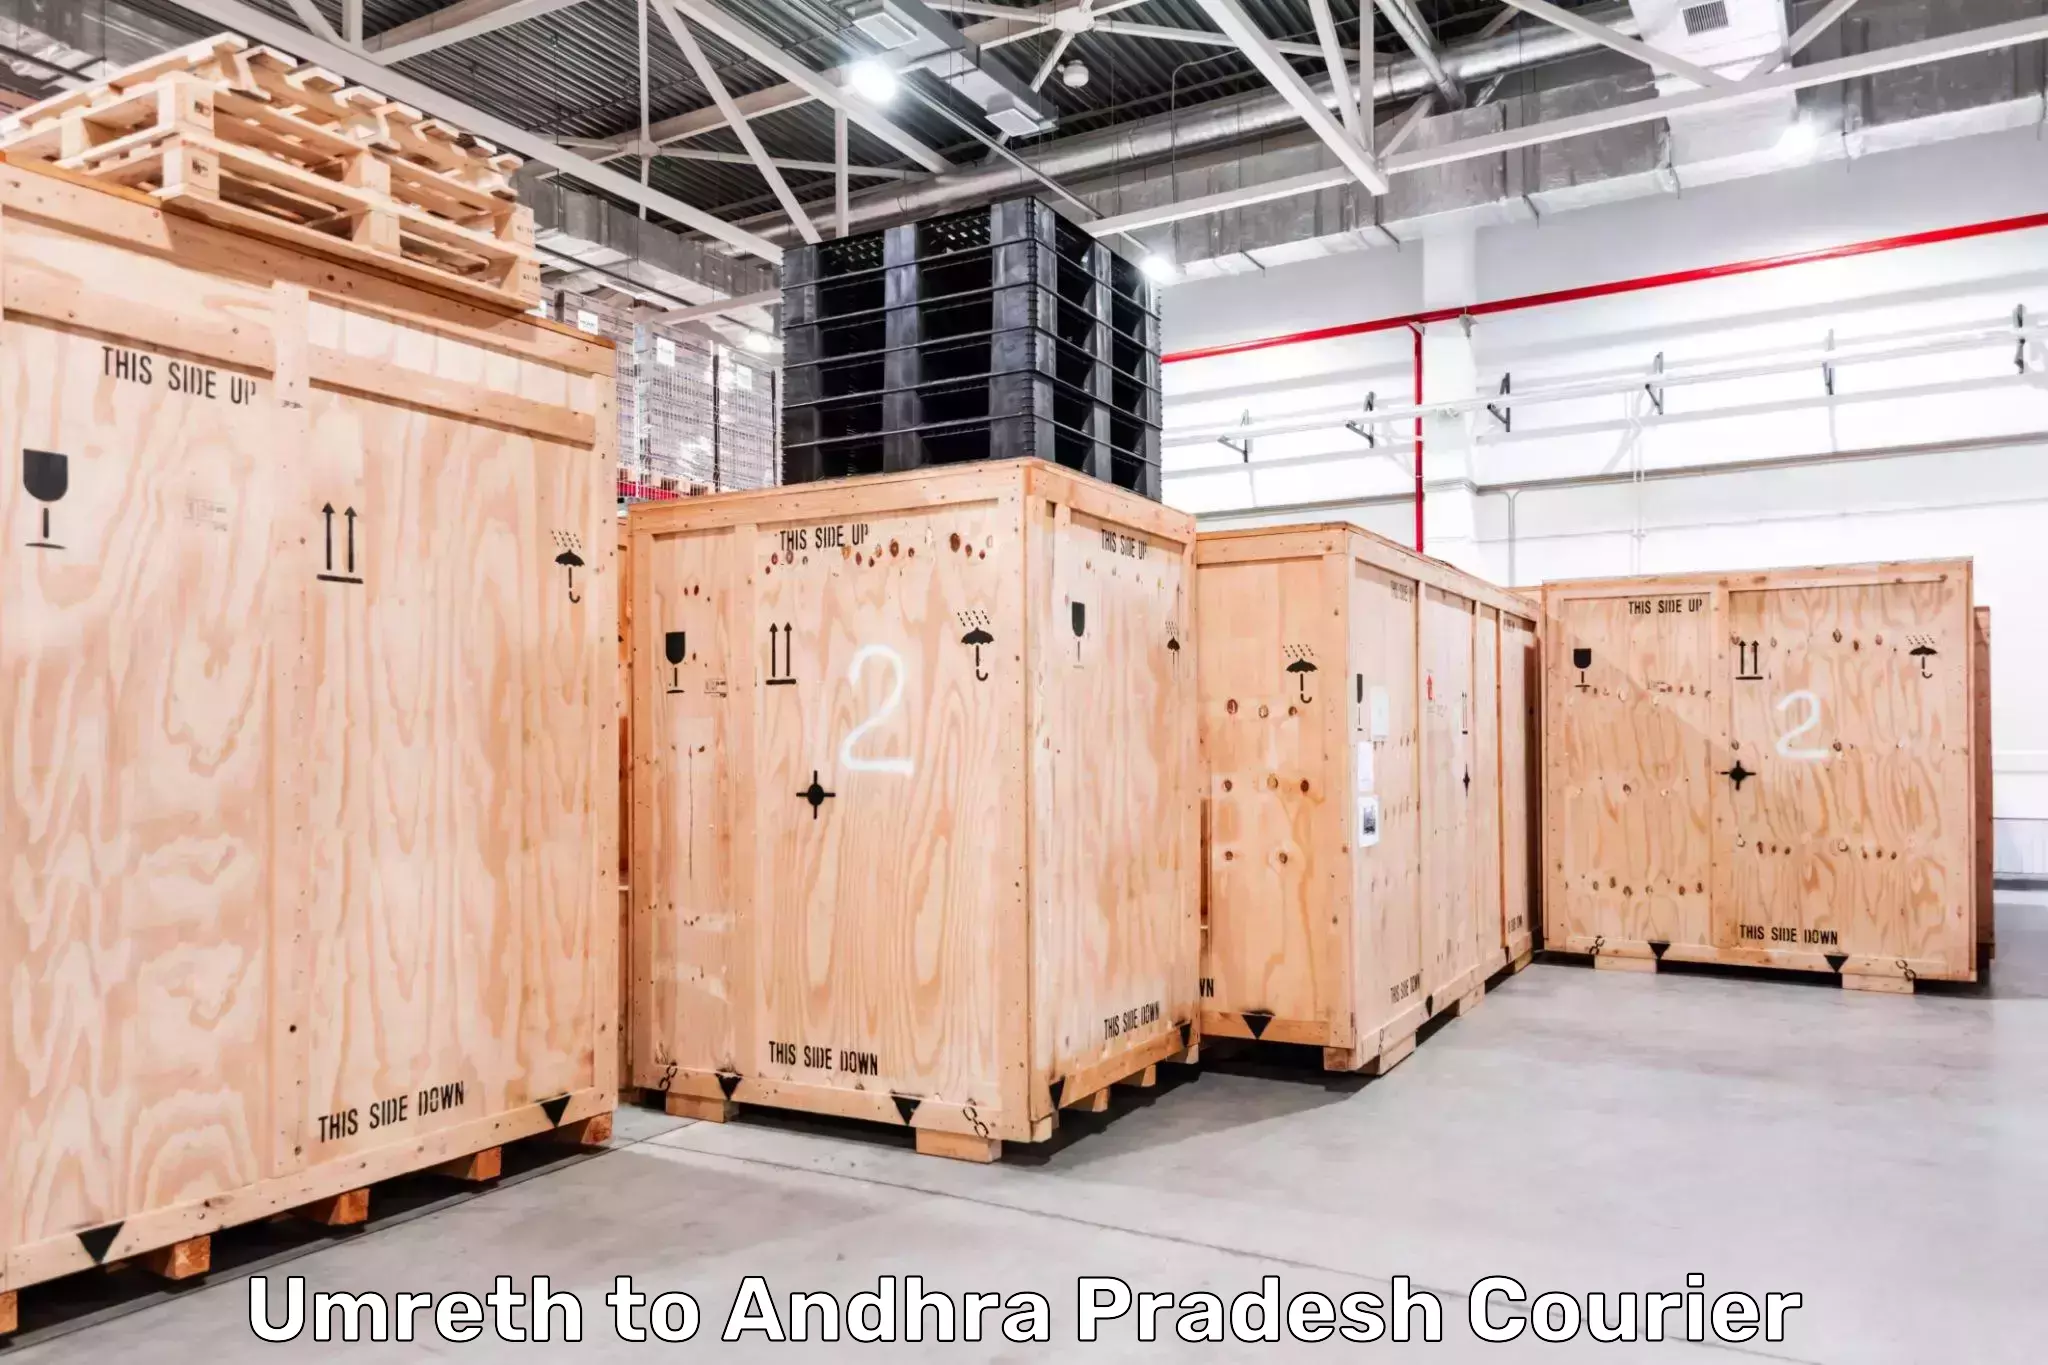 State-of-the-art courier technology Umreth to Andhra Pradesh